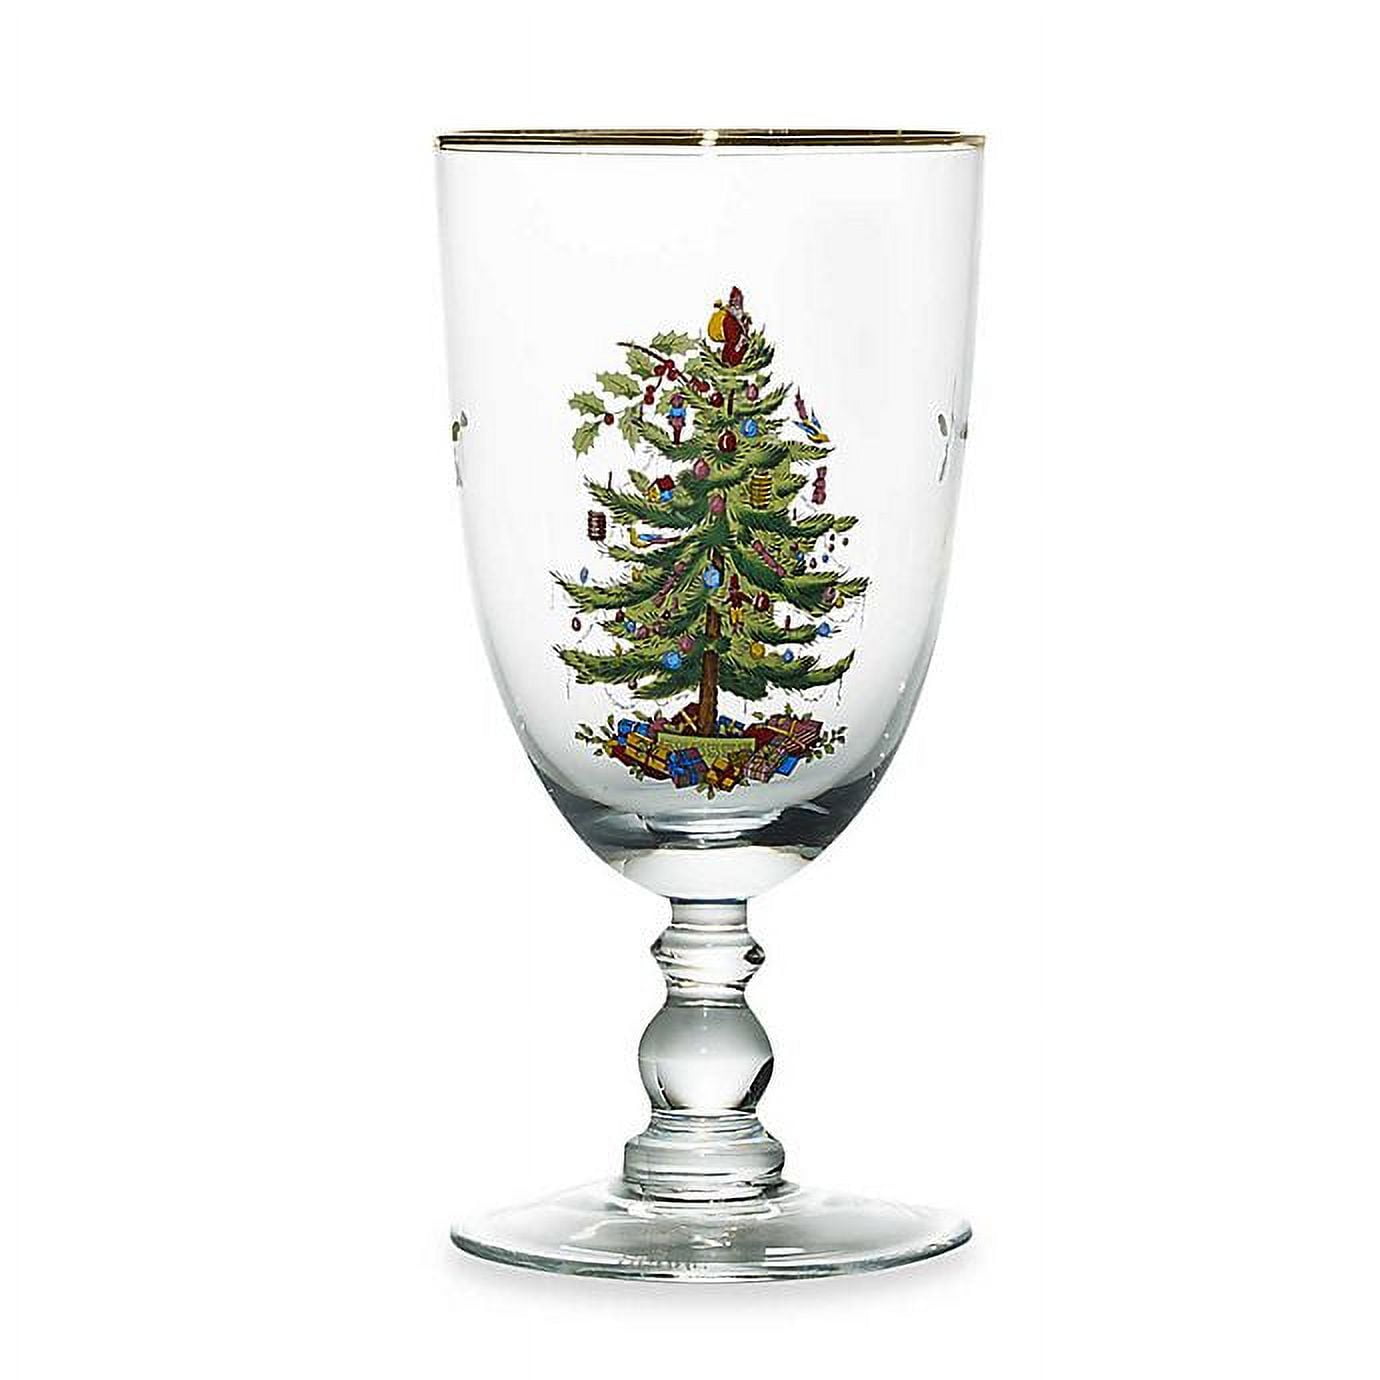 Sold at Auction: 29 PCS - SPODE CHRISTMAS TREE GLASSWARE